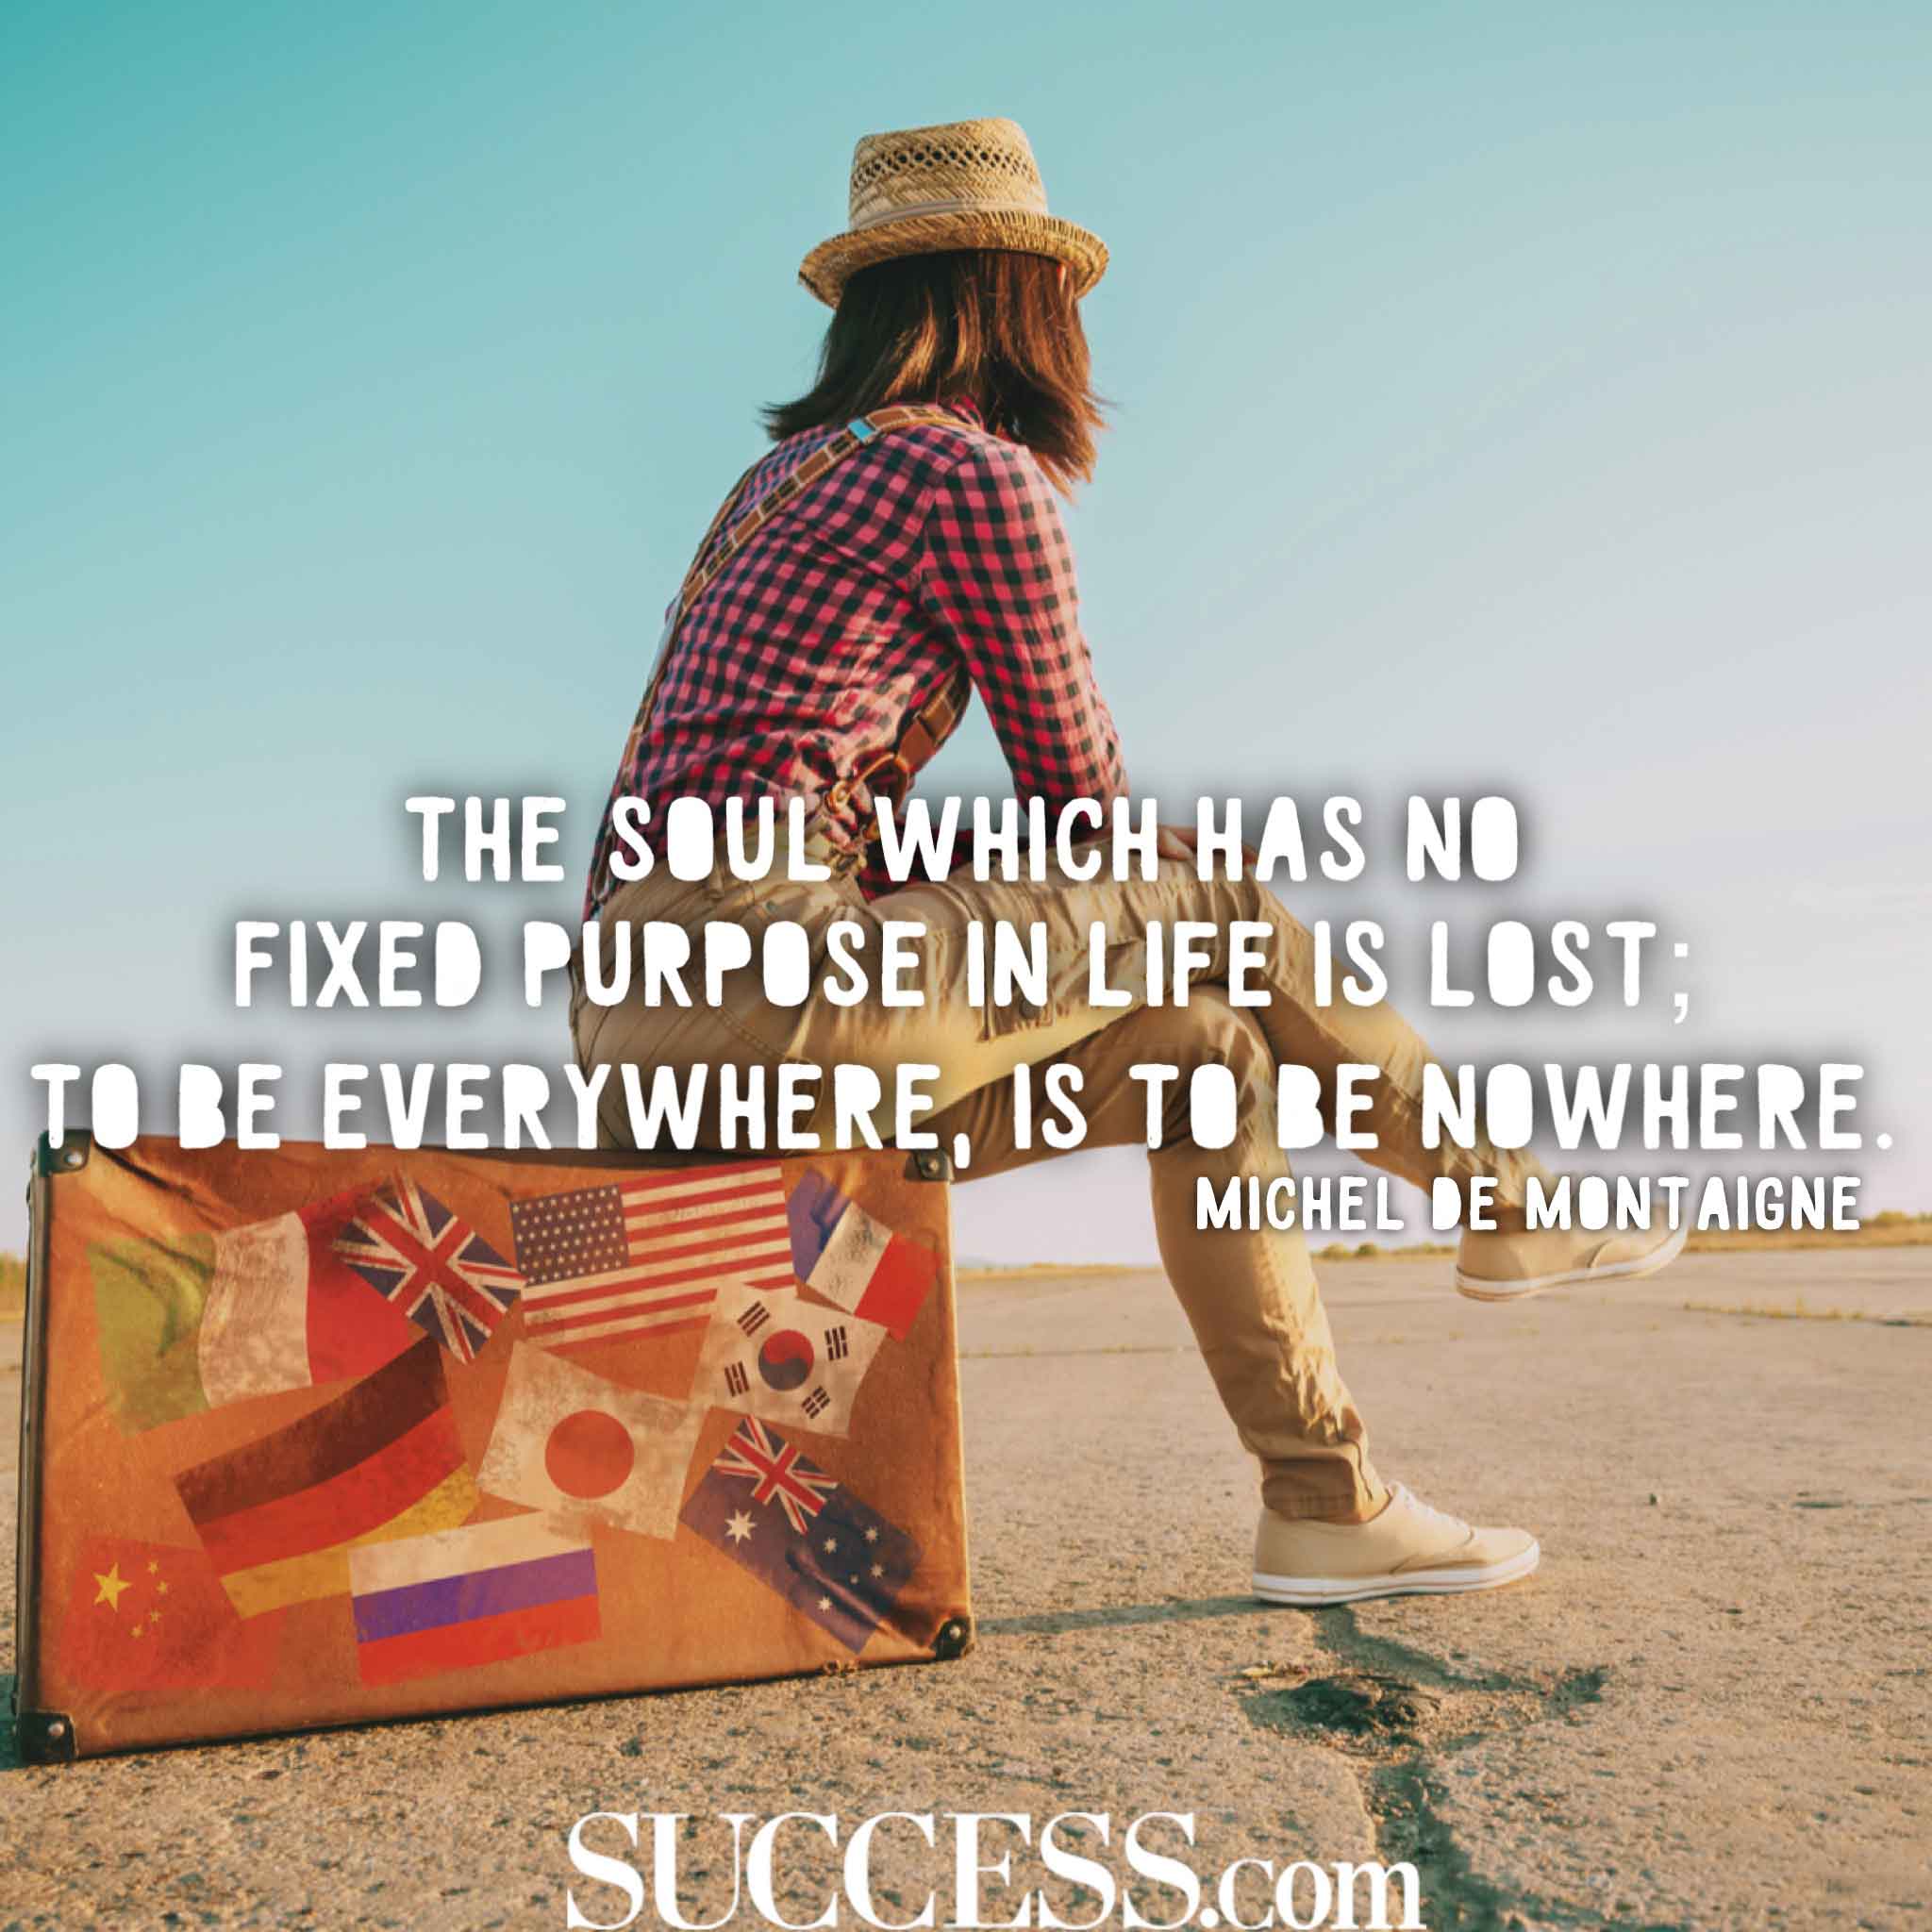 17 Inspiring Quotes to Help You Live a Life of Purpose | SUCCESS